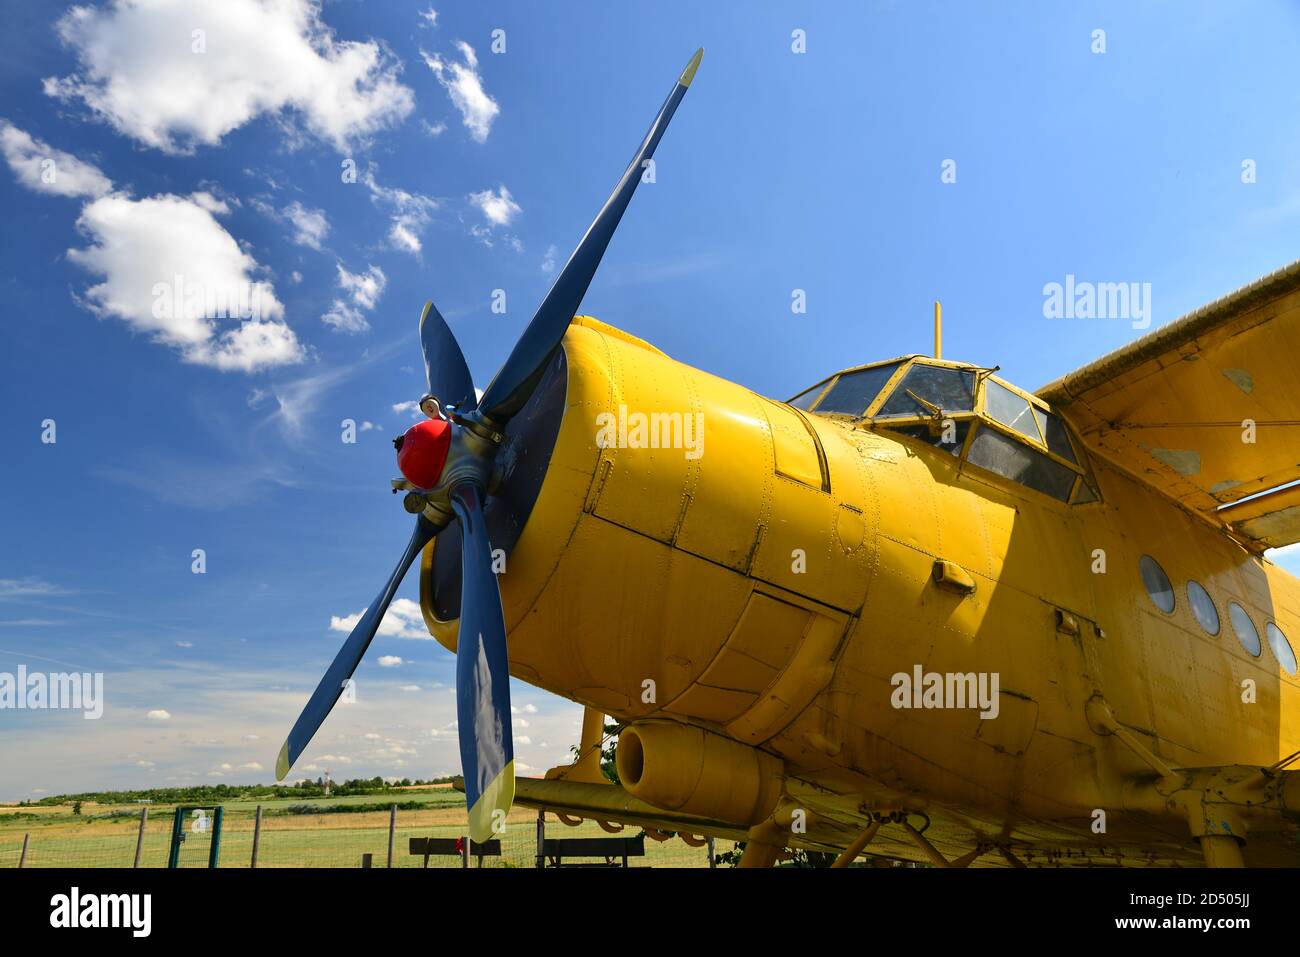 Close-up view of an old yellow plane. Isolated yellow bi plane on grassy meadow under blue sky with dynamic clouds. Aircraft at a grassy airfield. Stock Photo